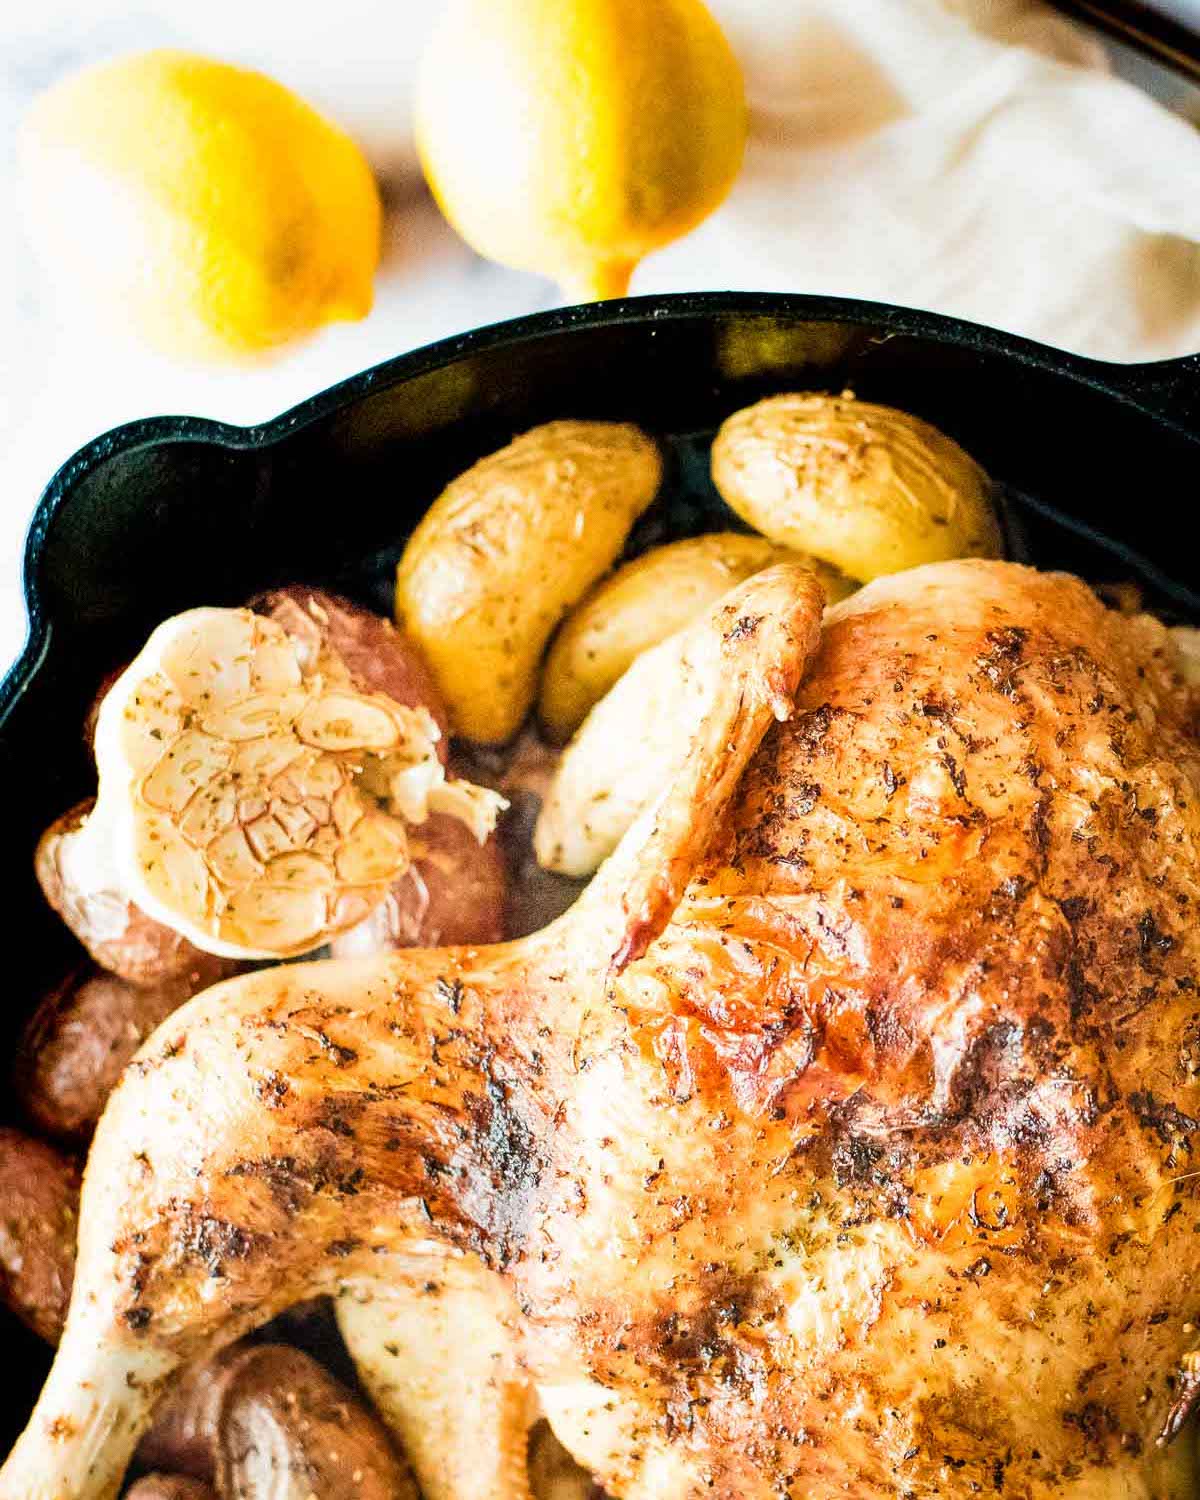 A chicken in a cast iron skillet with potatoes and lemons.